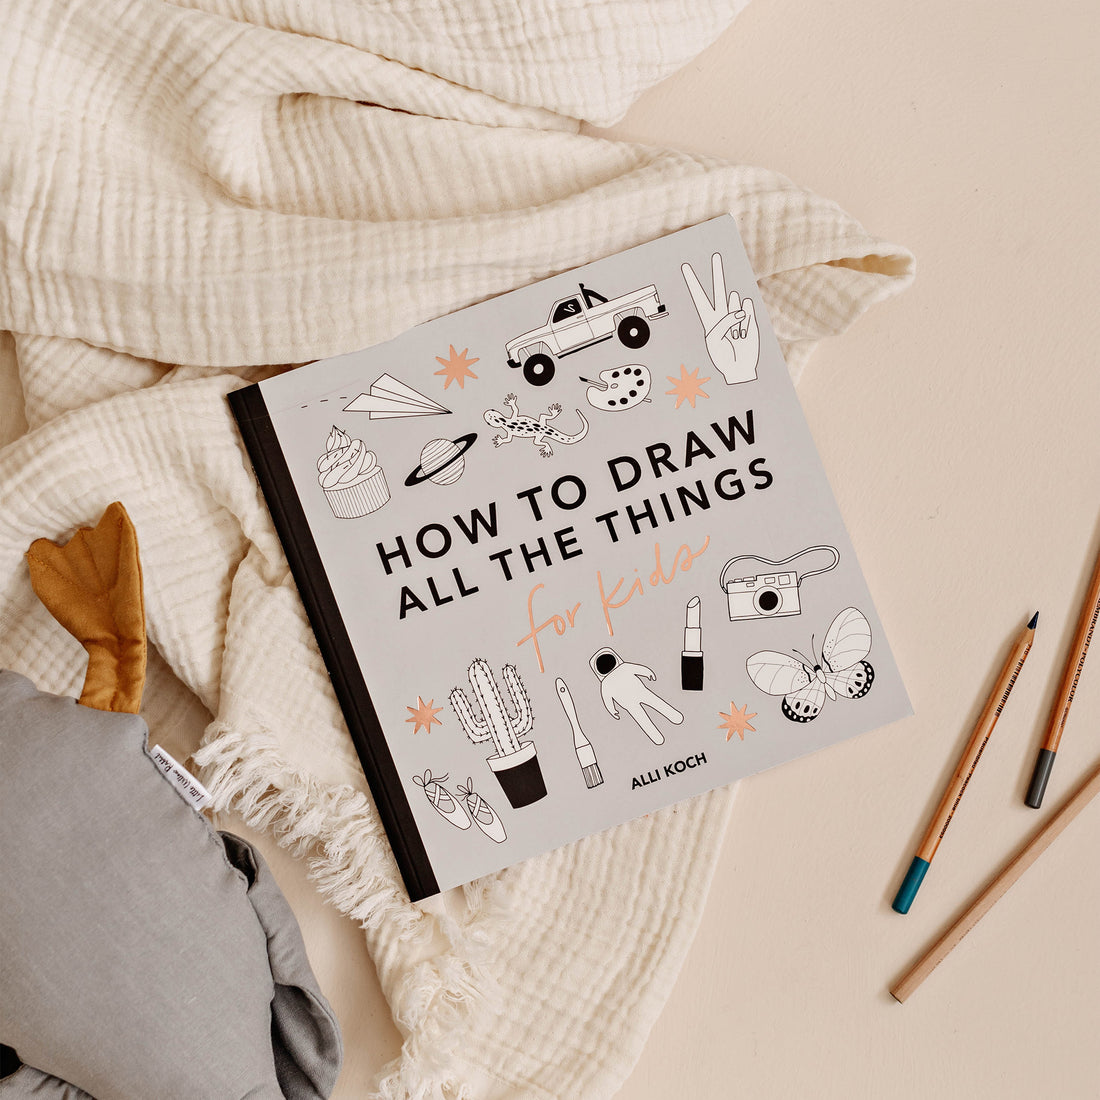 Learn to Draw Girl Stuff: Book for Kids Ages 5-7